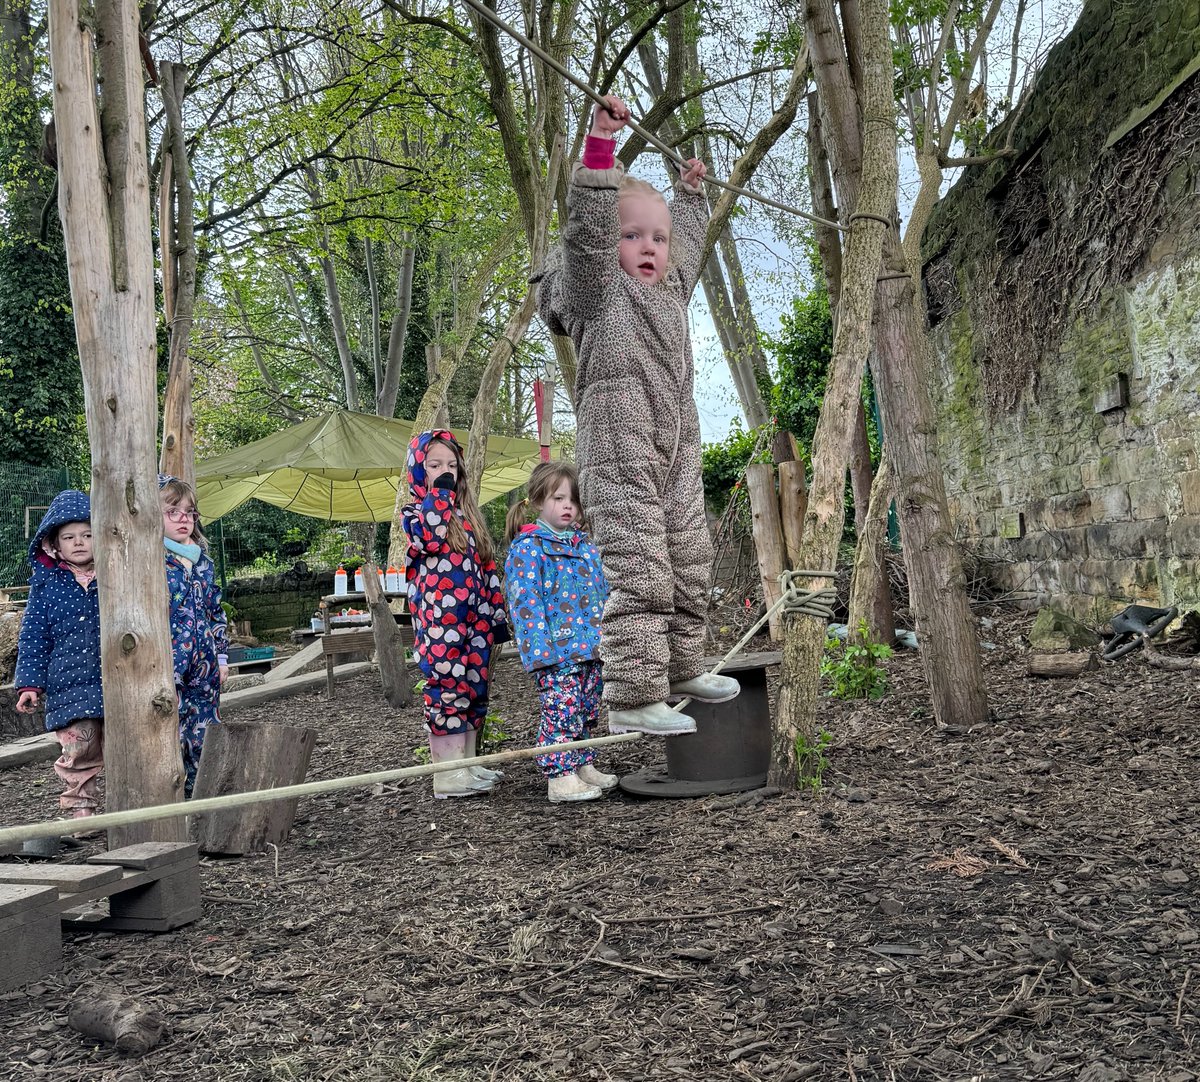 More adventures in Forest School - Y6 have been completing their DT unit by 'adapting a recipe' for the classic spag bol! For EYFS it was time to tie on the high(ish!) ropes and go for an adventure, demonstrating one of our core values of #courage